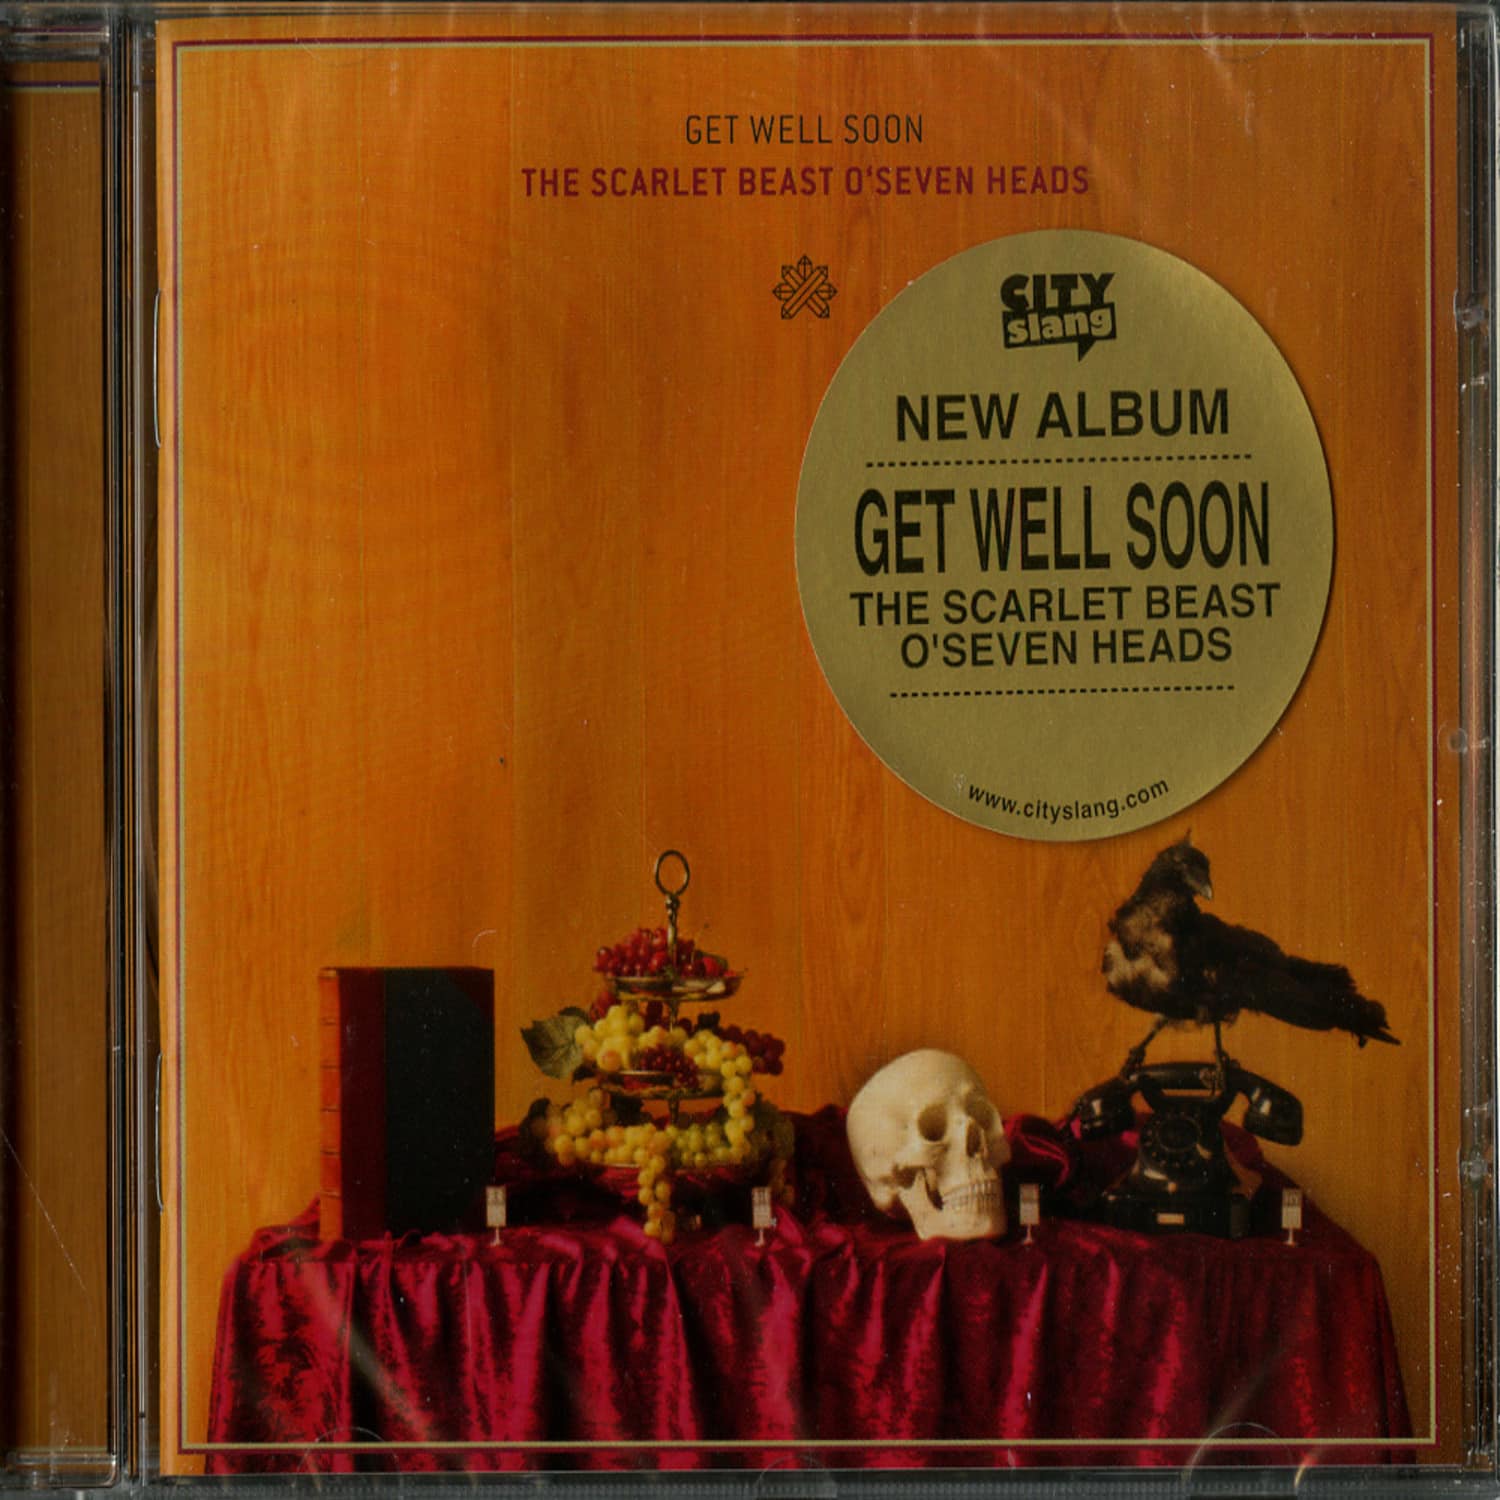 Get Well Soon - THE SCARLET BEAST THE SCARLET BEAST O SEVEN HEADS 